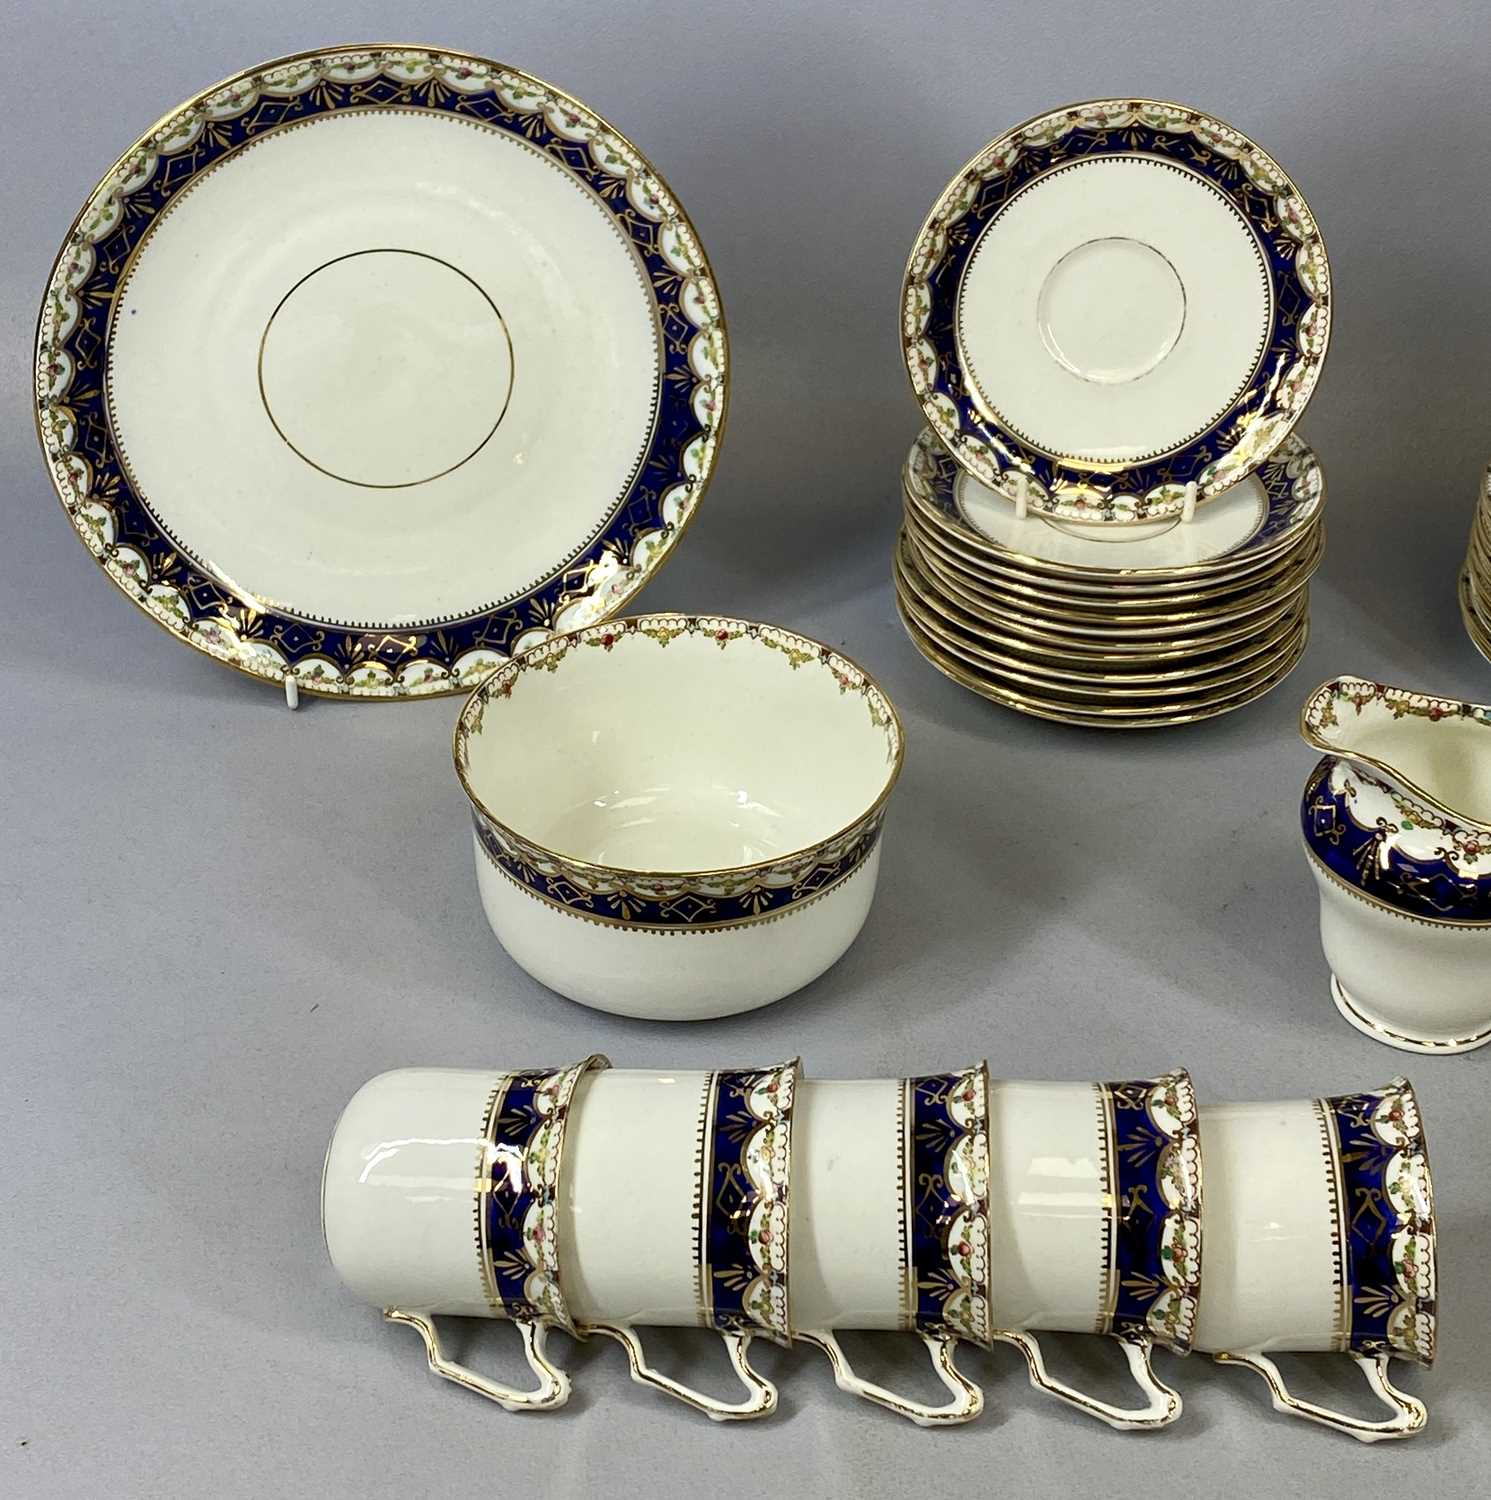 A DUCHESS CHINA TEA SERVICE, cream glazed with floral blue and gilt banded border, 38 pieces, with a - Image 2 of 5